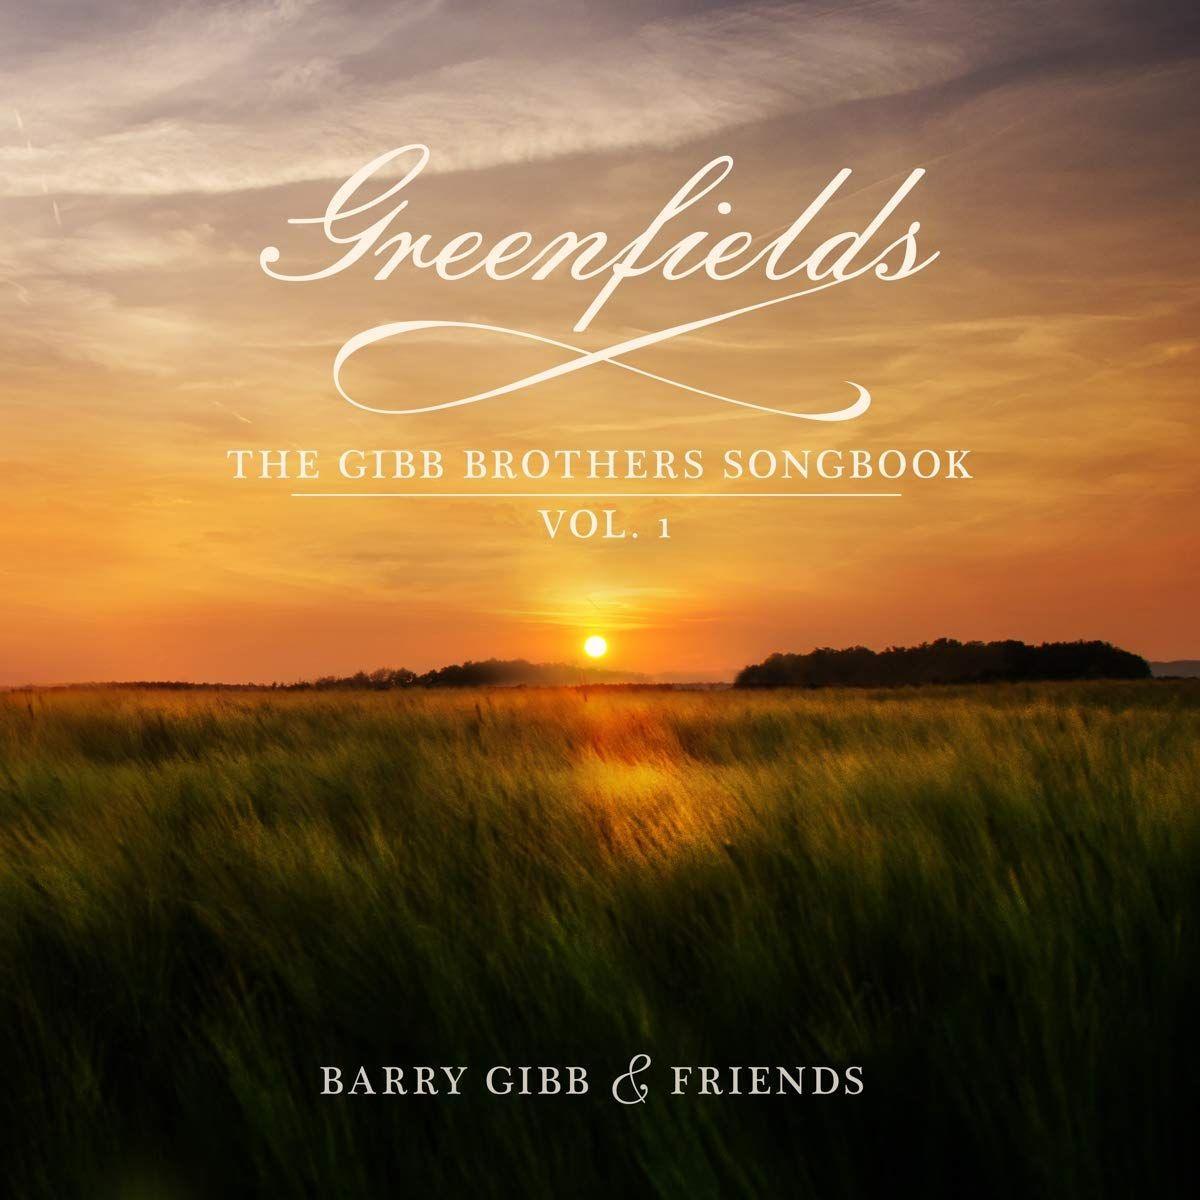 Audio Greenfields: The Gibb Brothers' Songbook 